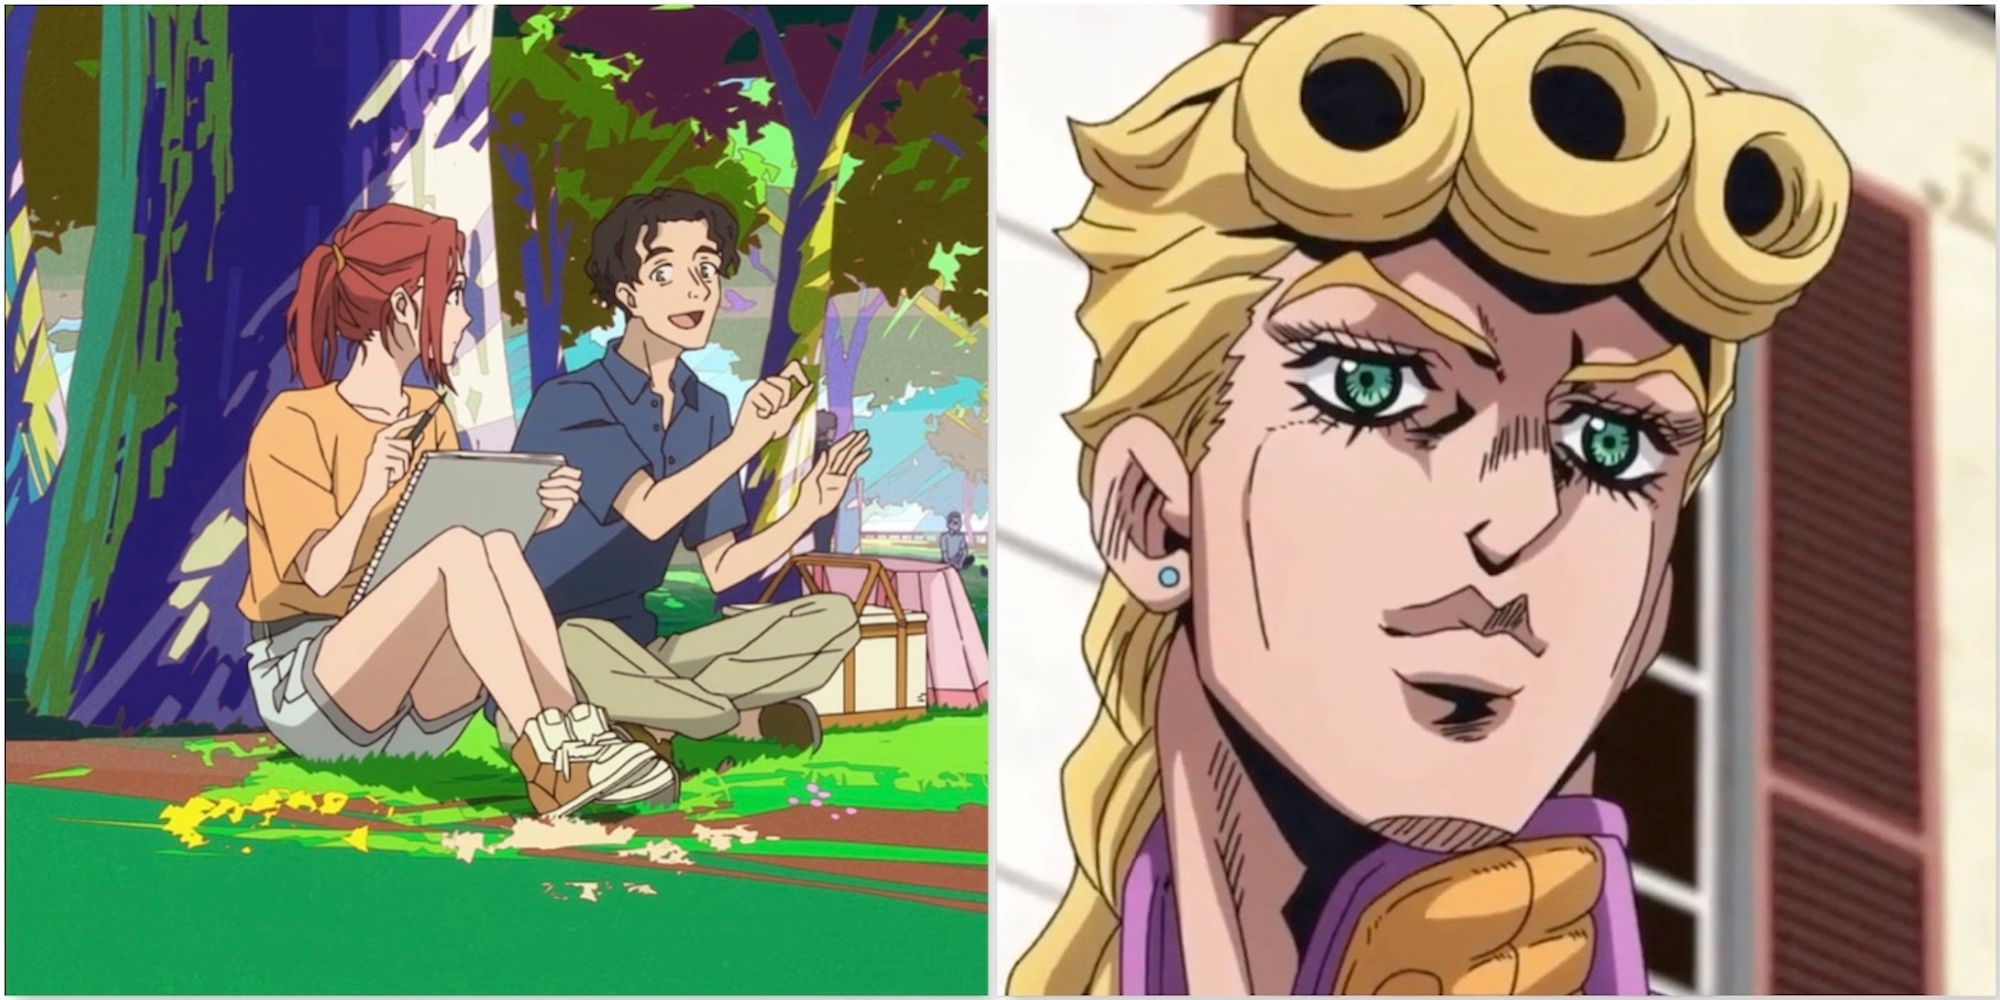 A scene featuring characters from Great Pretender and Giorno from Jojo’s Bizarre Adventure: Golden Wind 